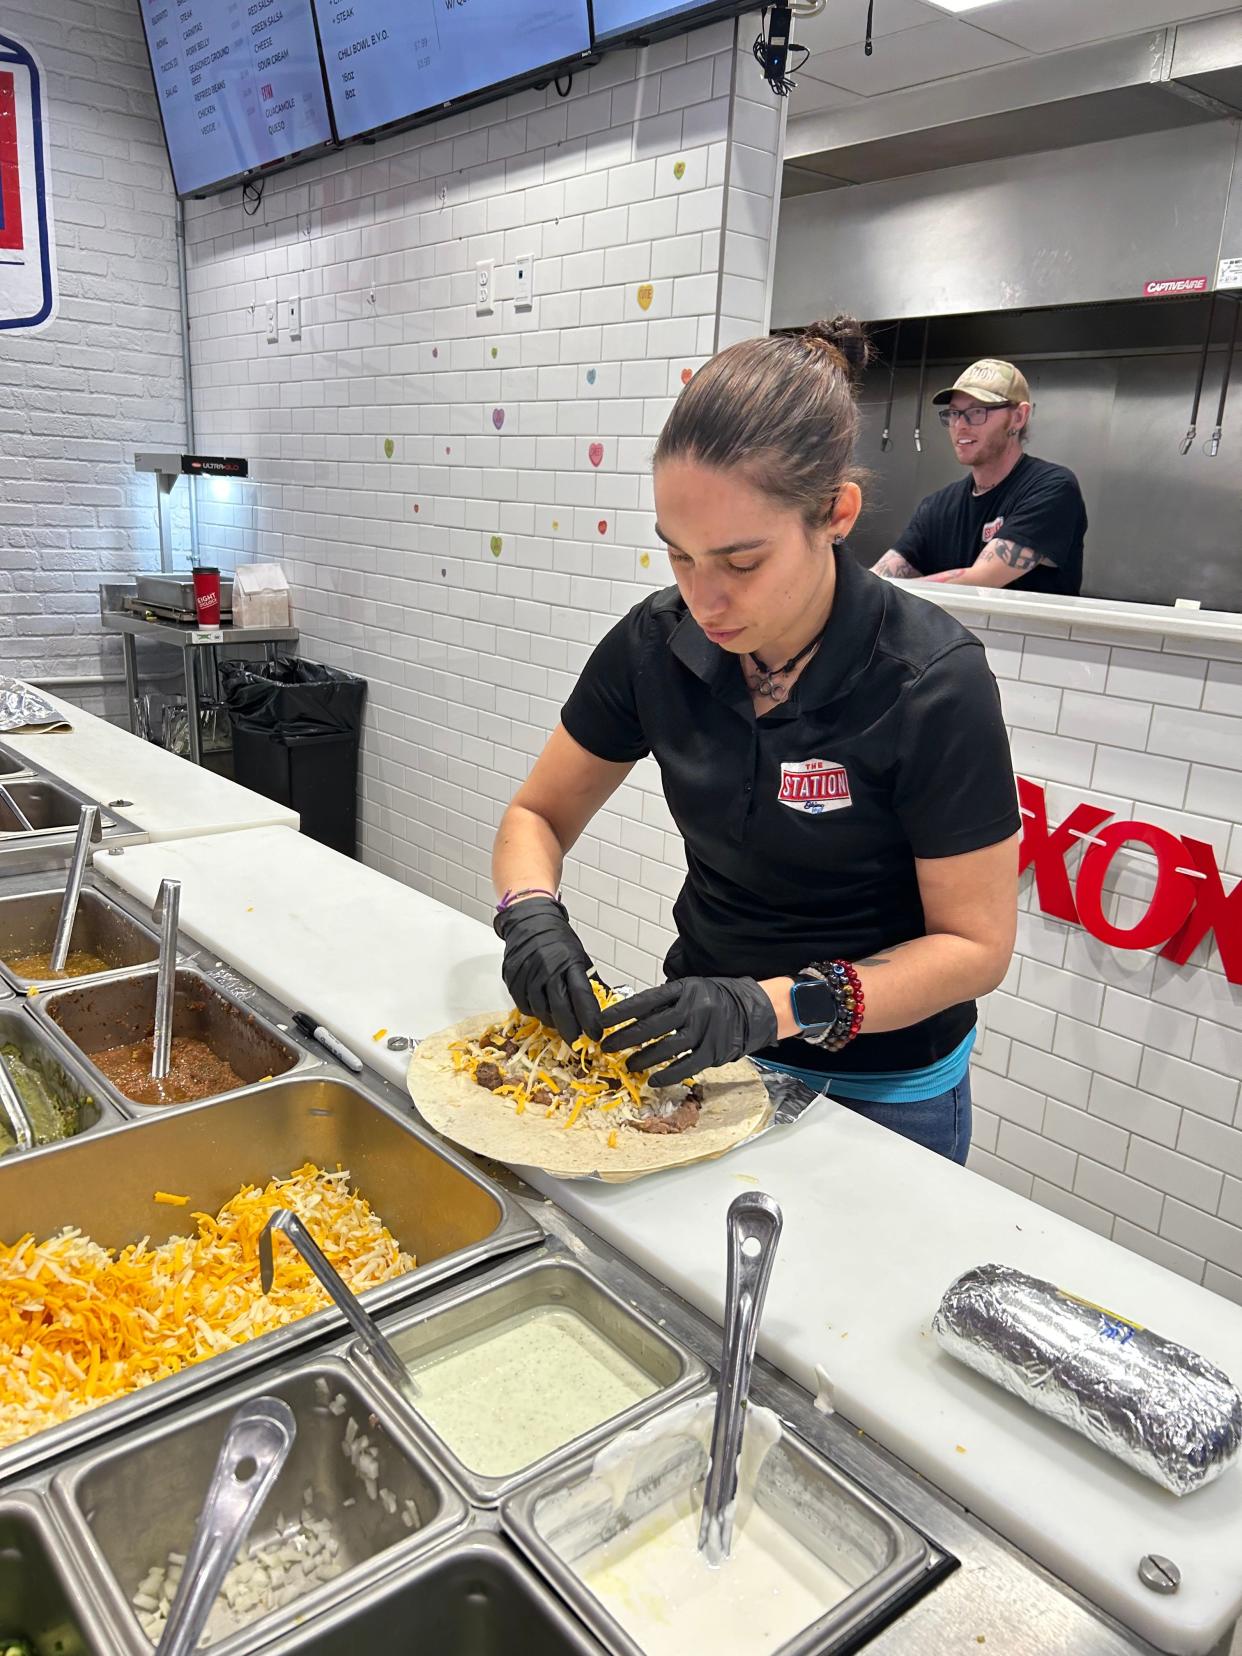 Anna Rivers finishes a custom made burrito for a hungry customer at Cowboy Station in the Conoco Station off McCormick Road. Rivers makes her own chili and keeps the recipe secret.